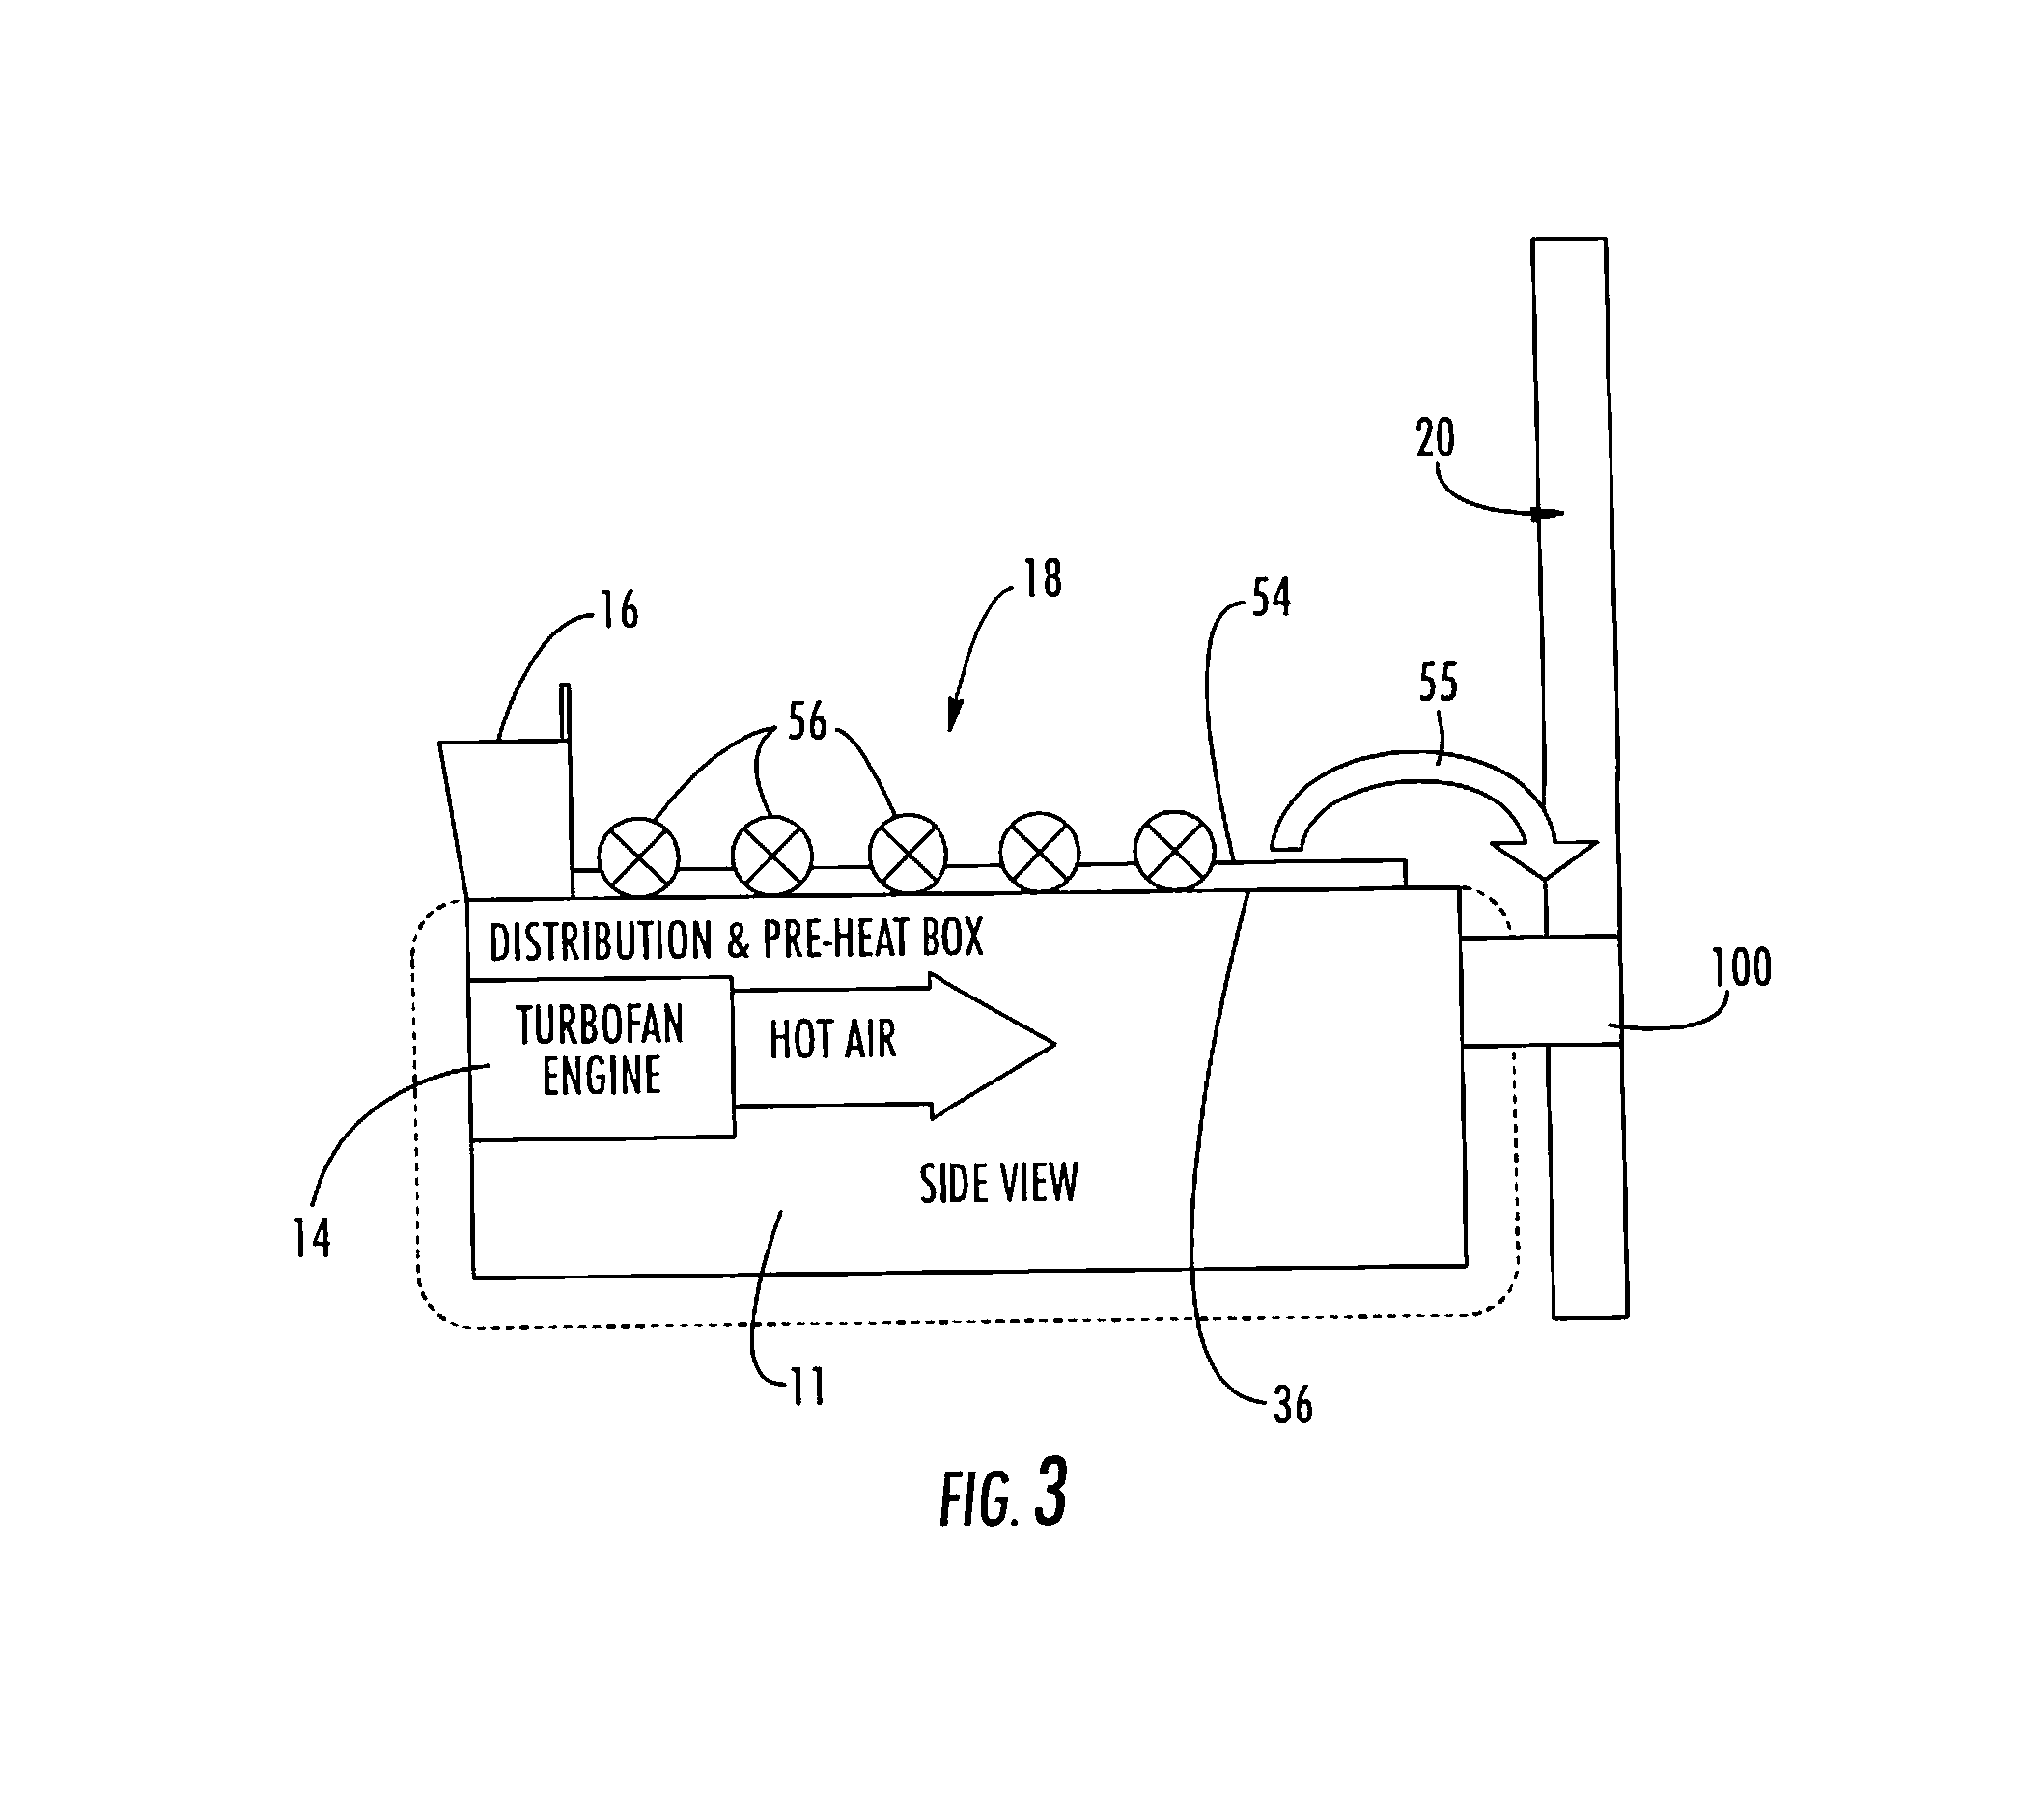 System and Method Employing Turbofan Jet Engine for Drying Bulk Materials